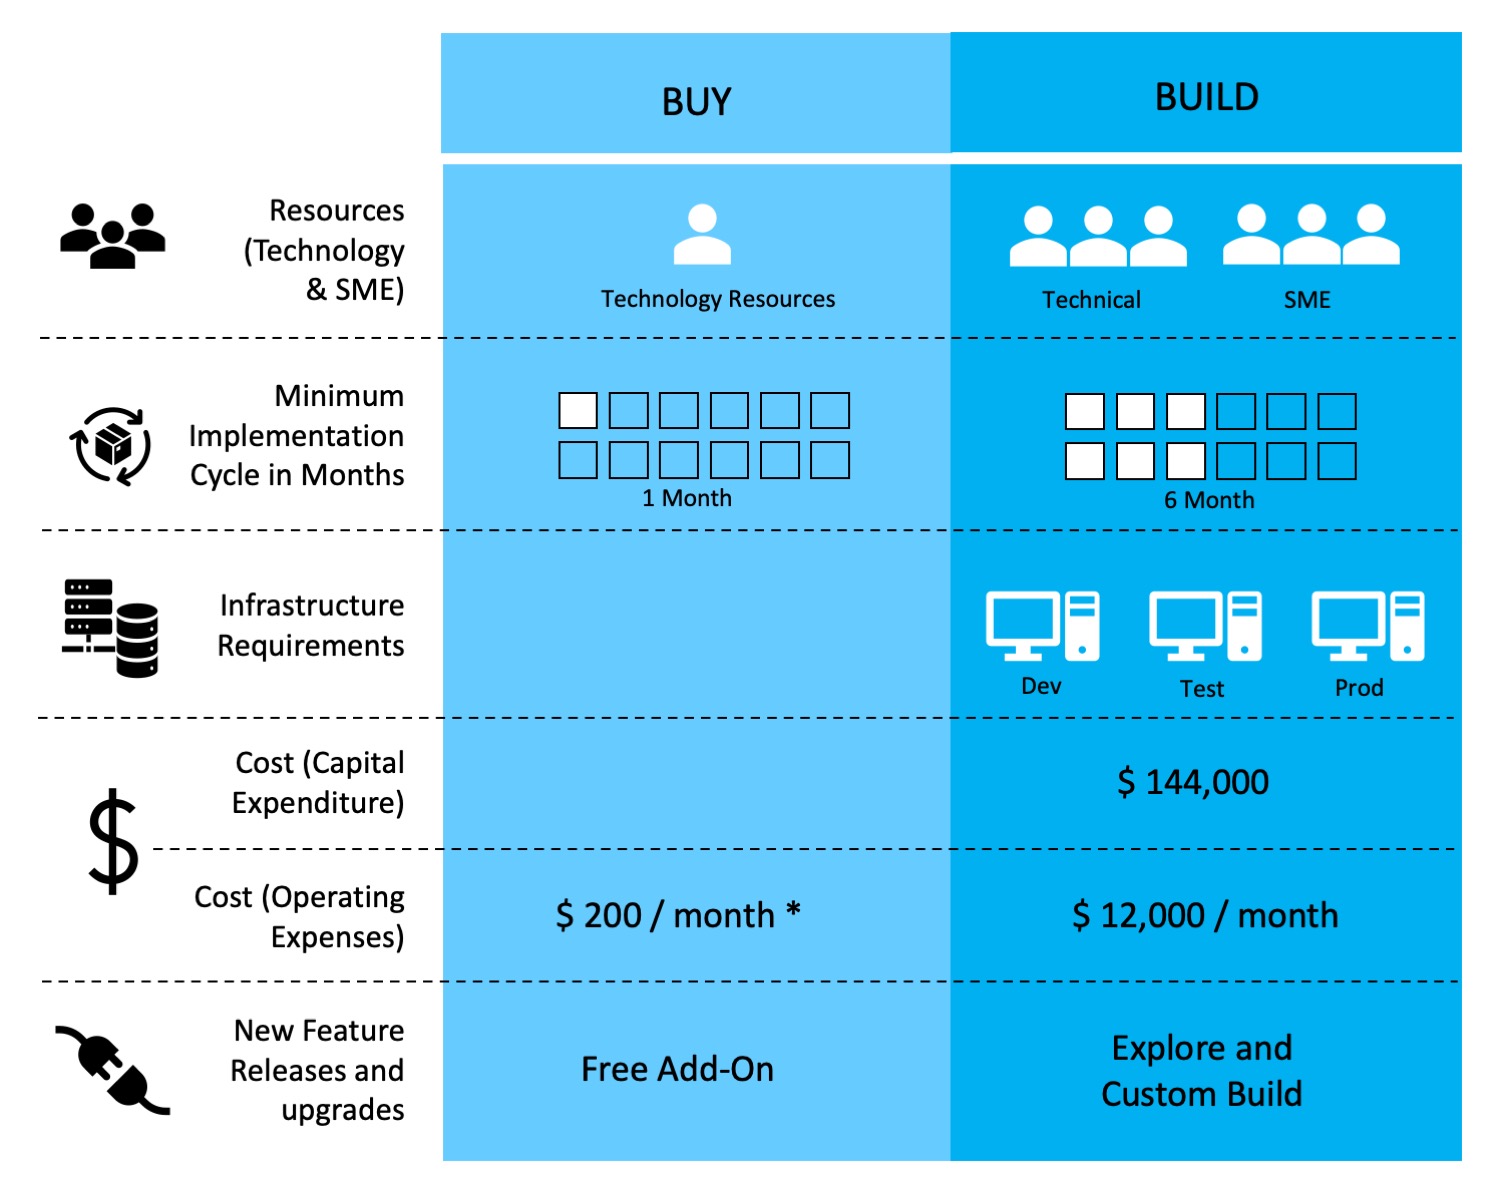 Costs Comparison of Buy vs Build for Intellify’s Lending Analytics Solution